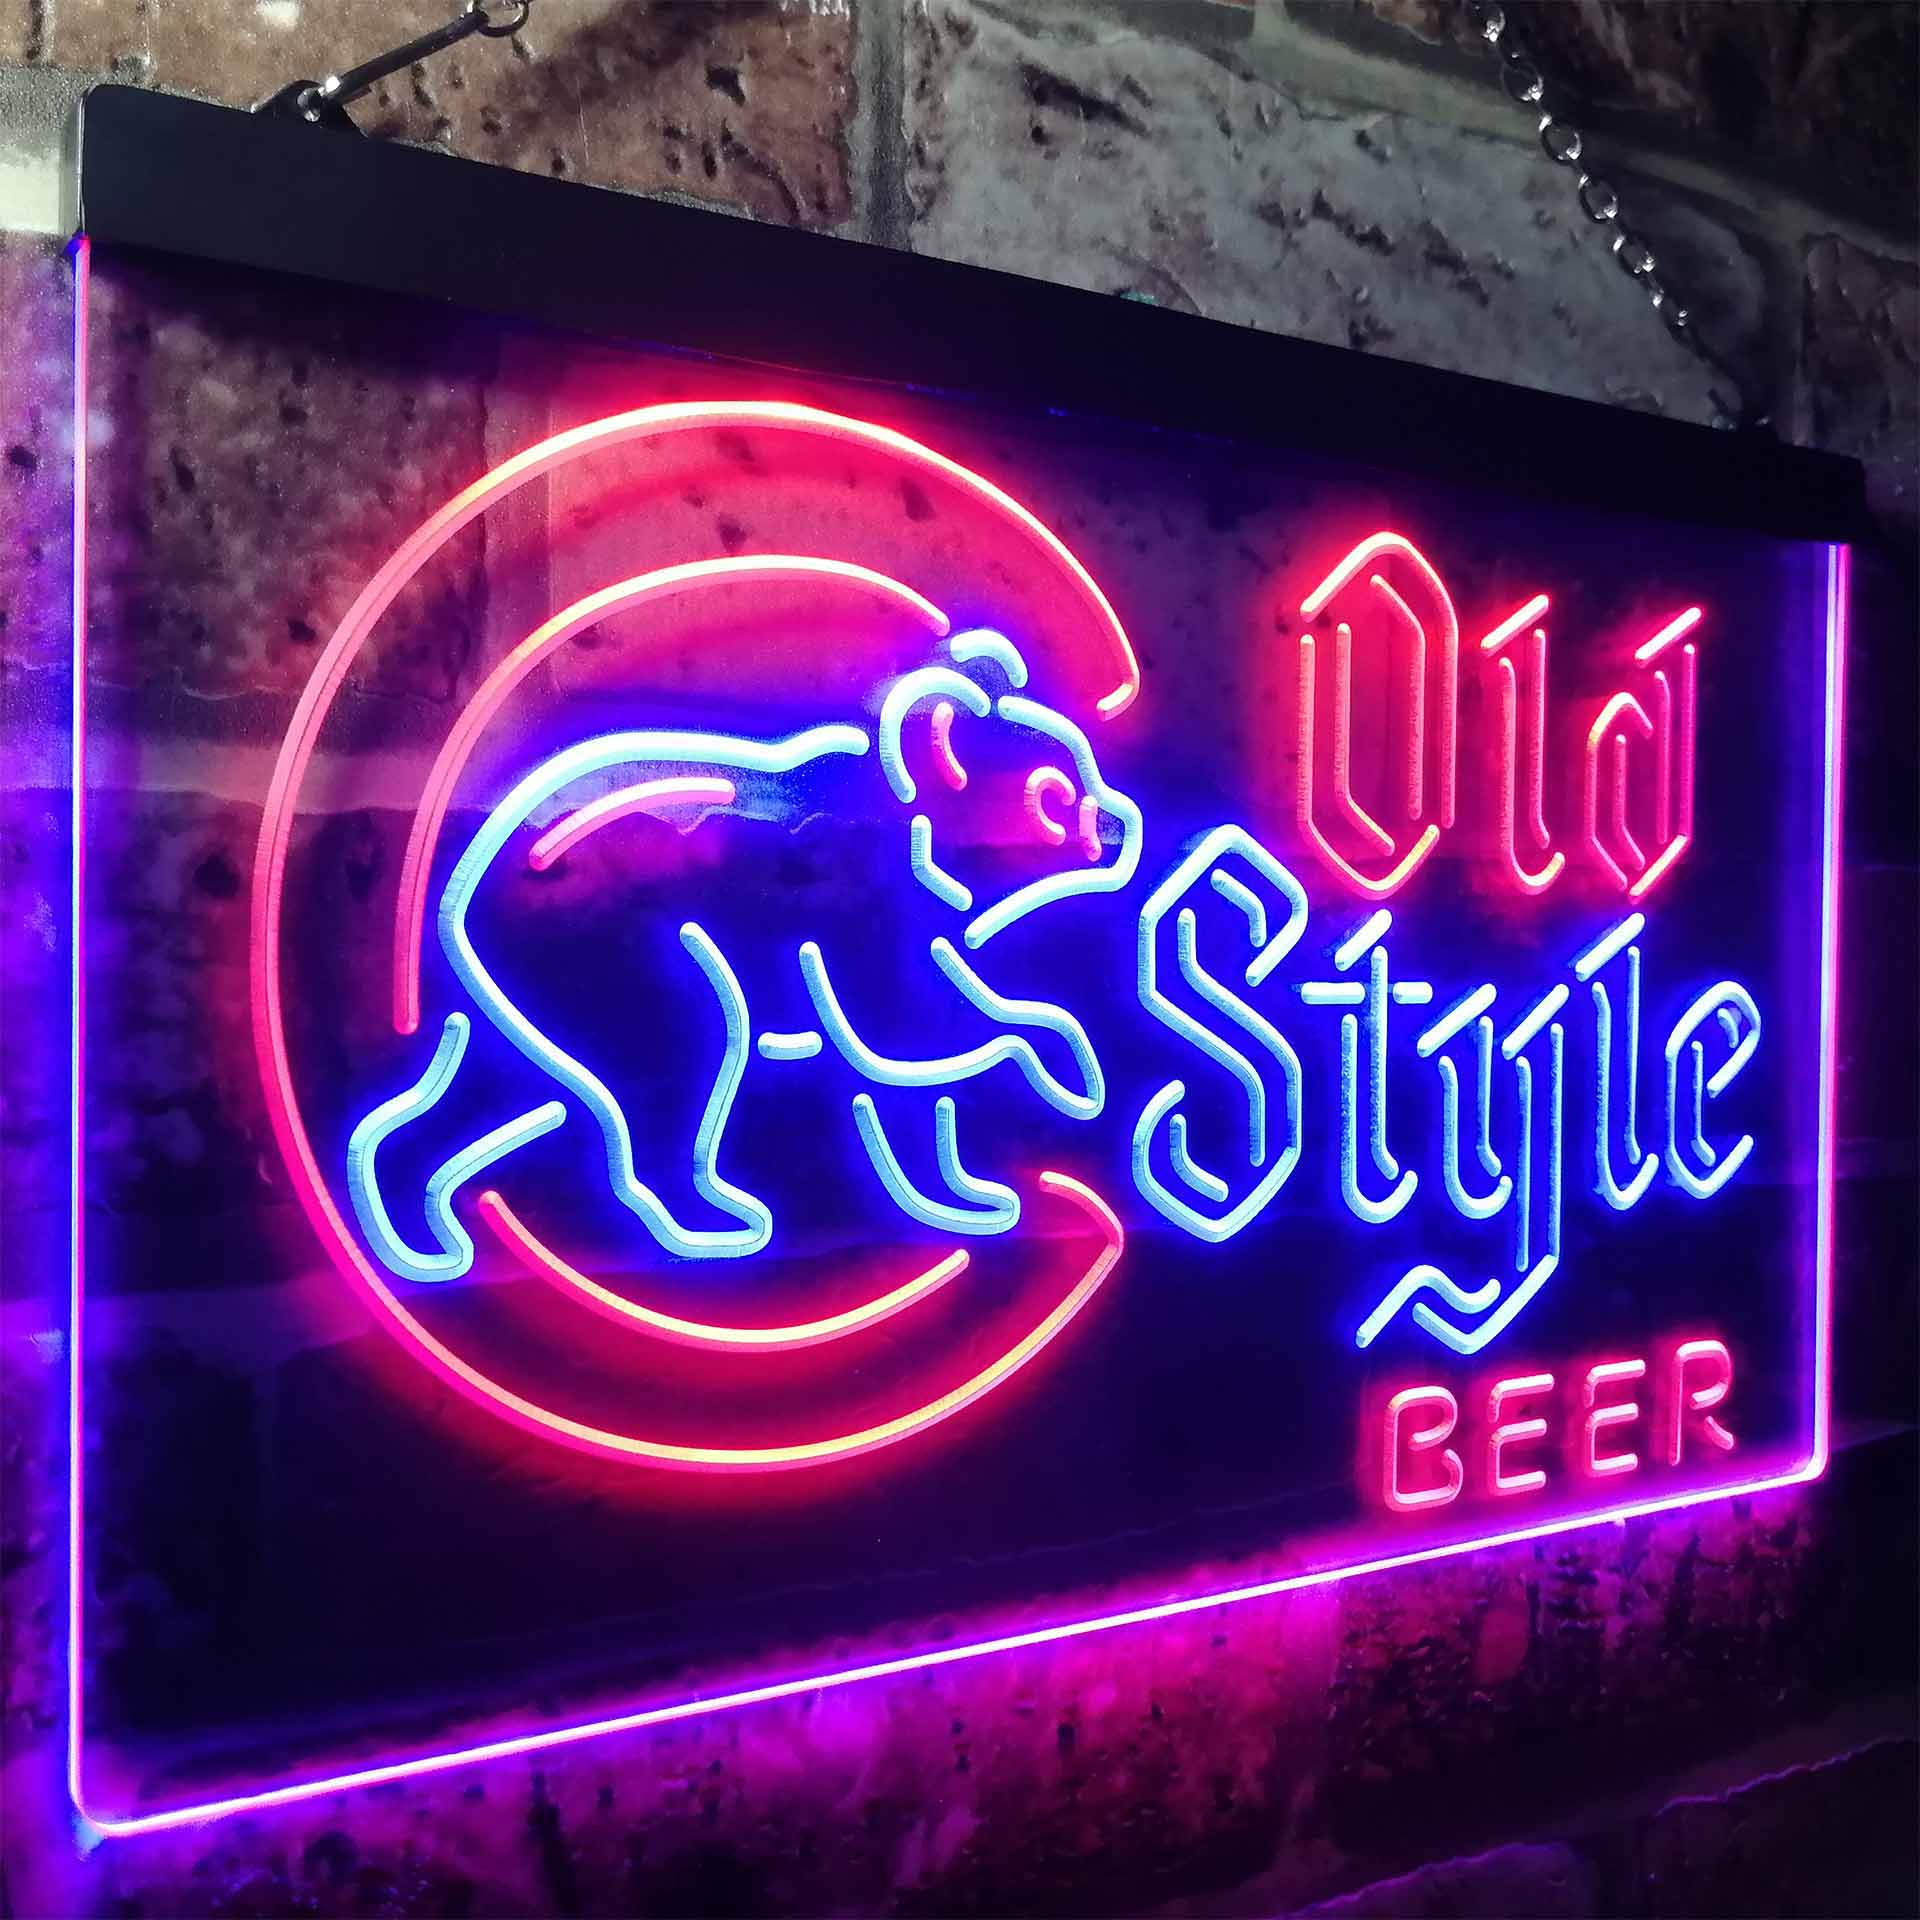 Cubs Old Style Beer Bar Neon LED Sign